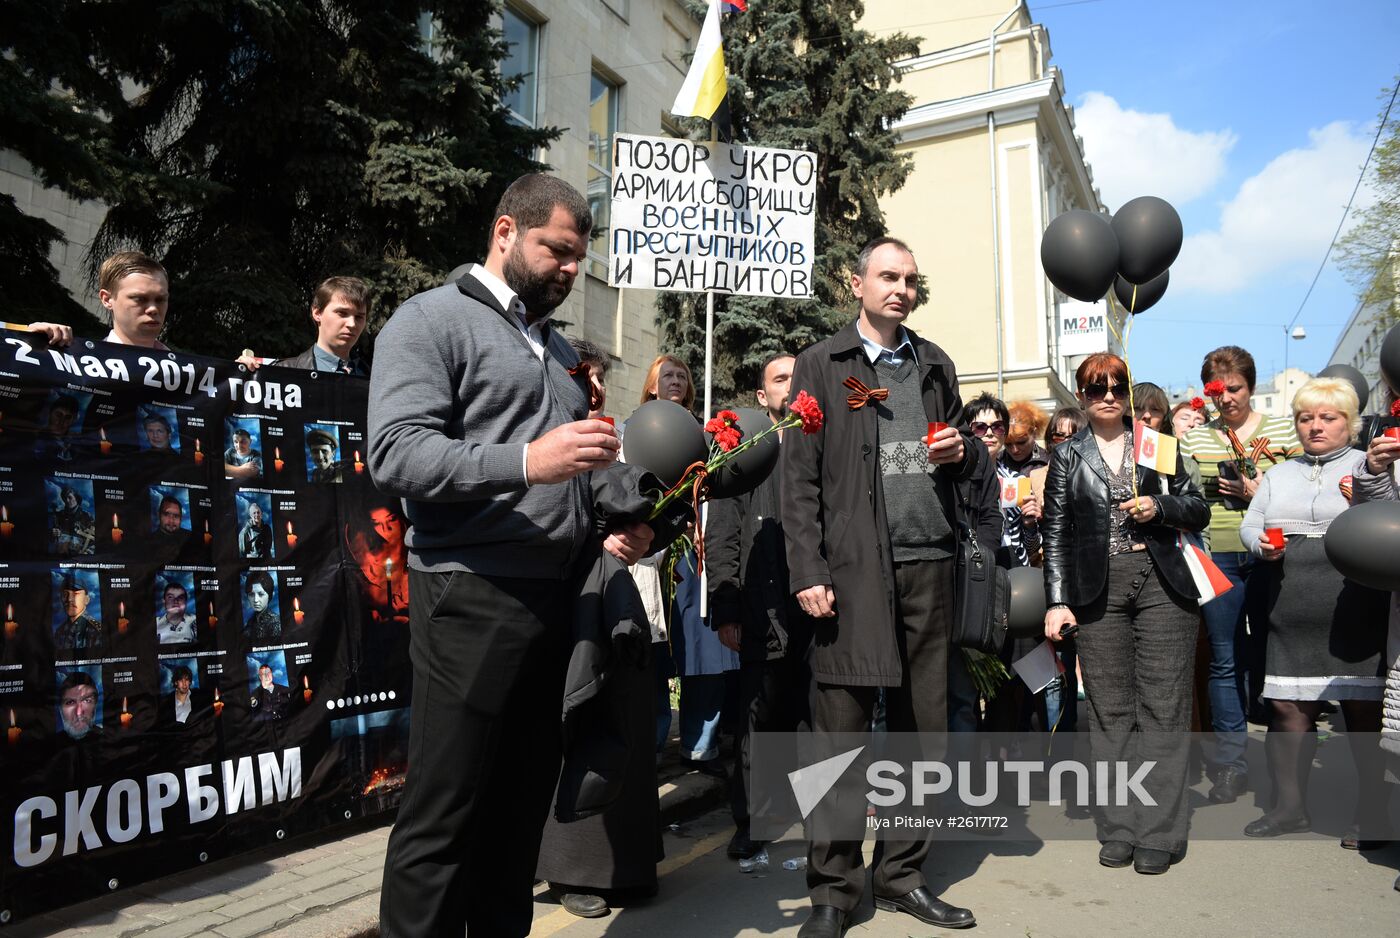 Rallies to commemorate victims of May 2, 2014 Odessa massacre